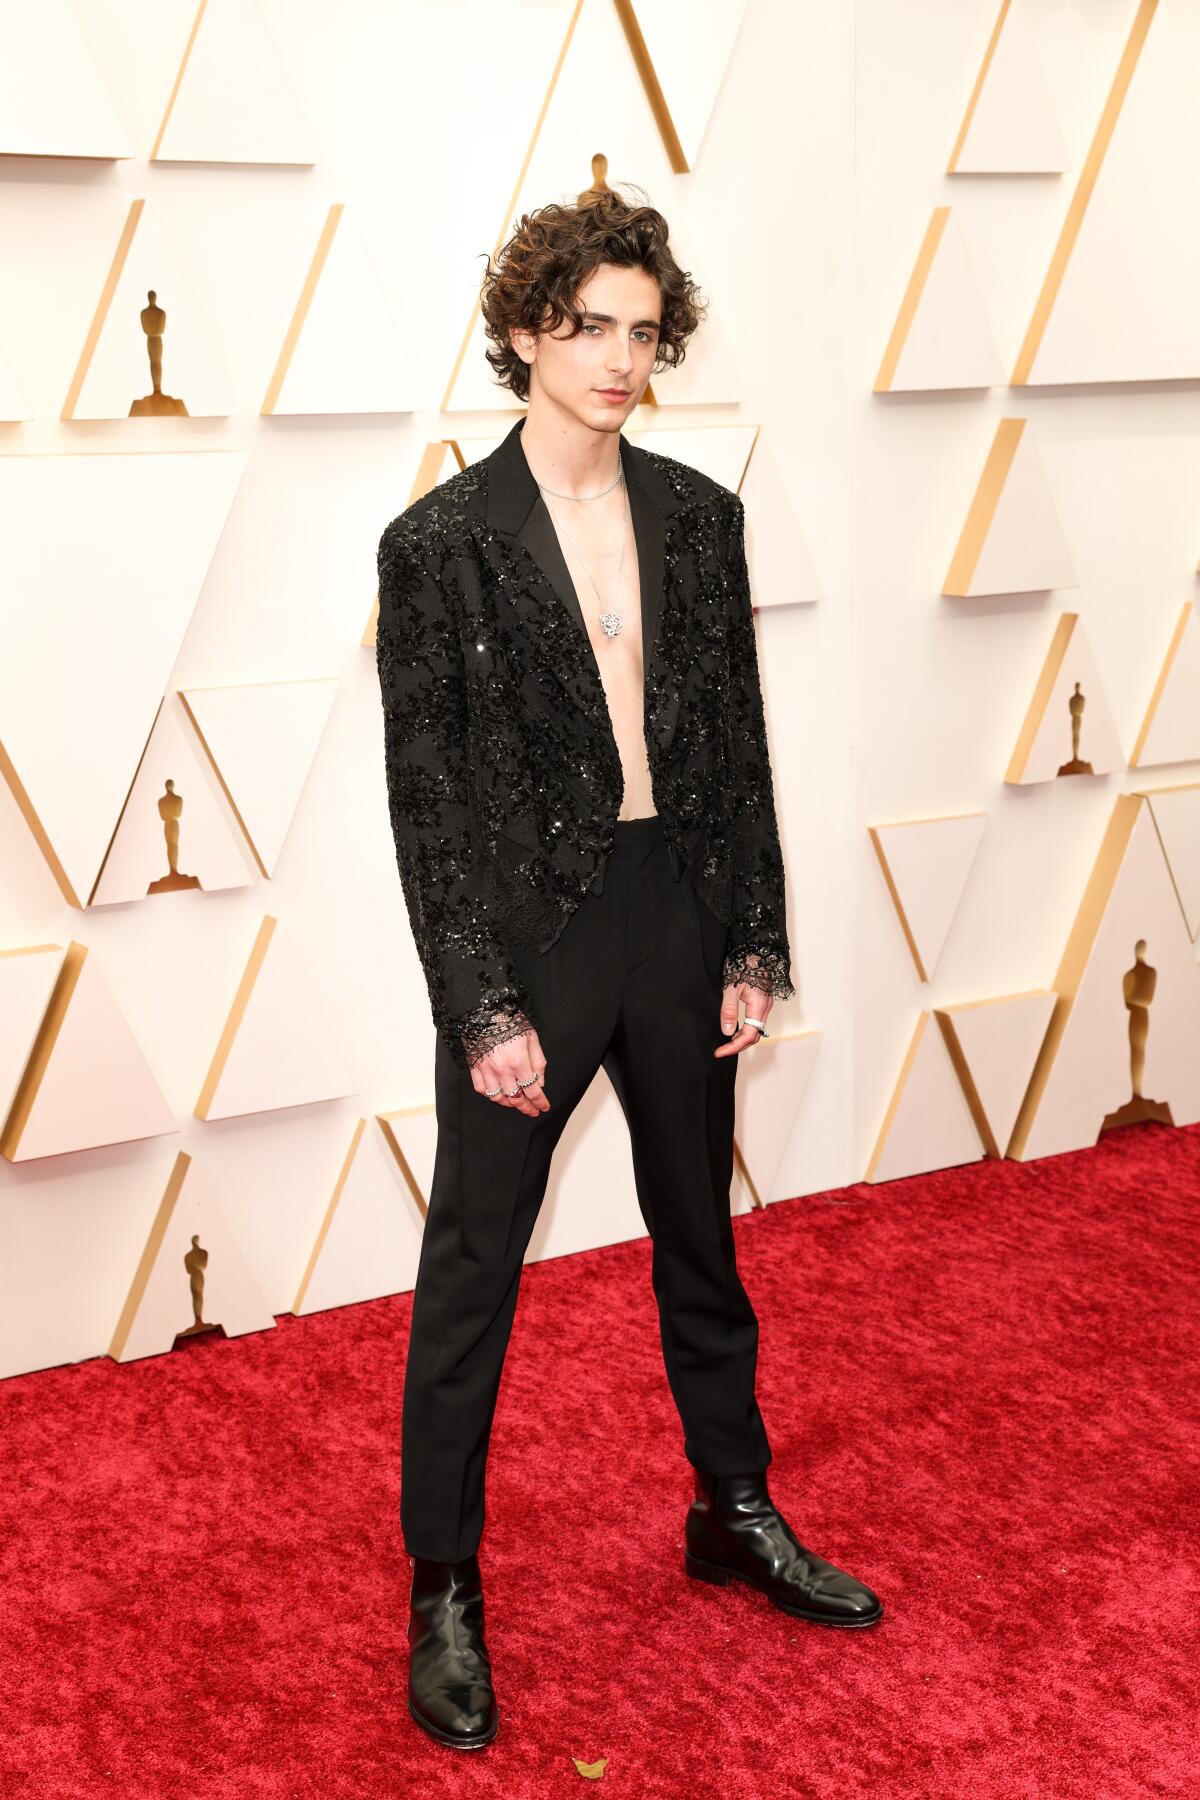 Timothée Chalamet arriving at the 94th Academy Awards